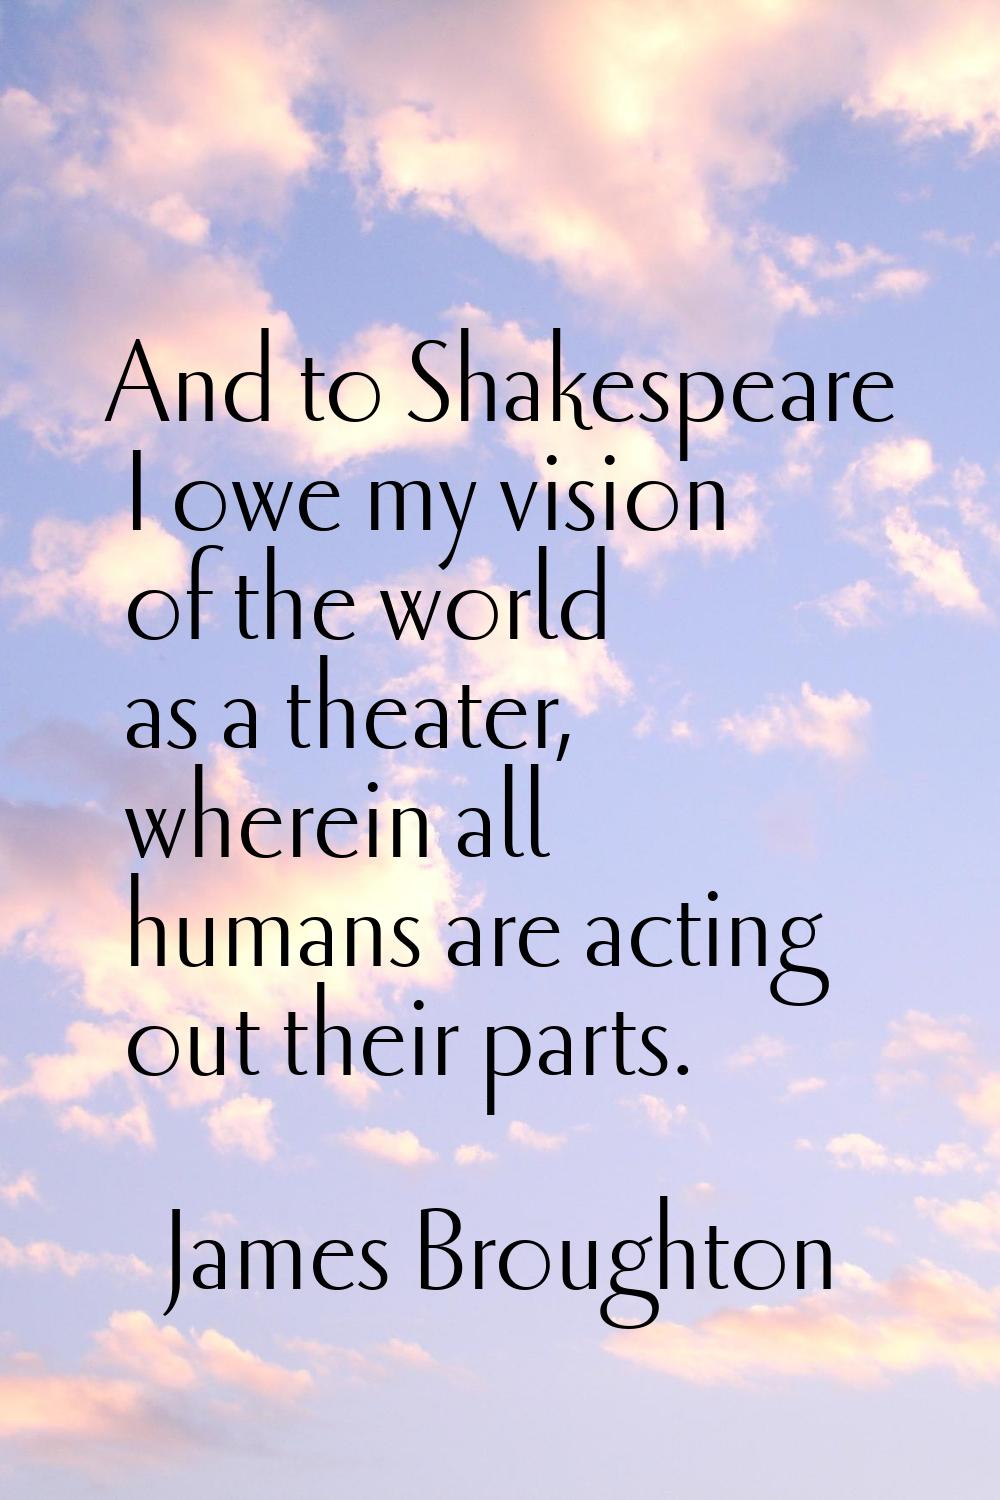 And to Shakespeare I owe my vision of the world as a theater, wherein all humans are acting out the